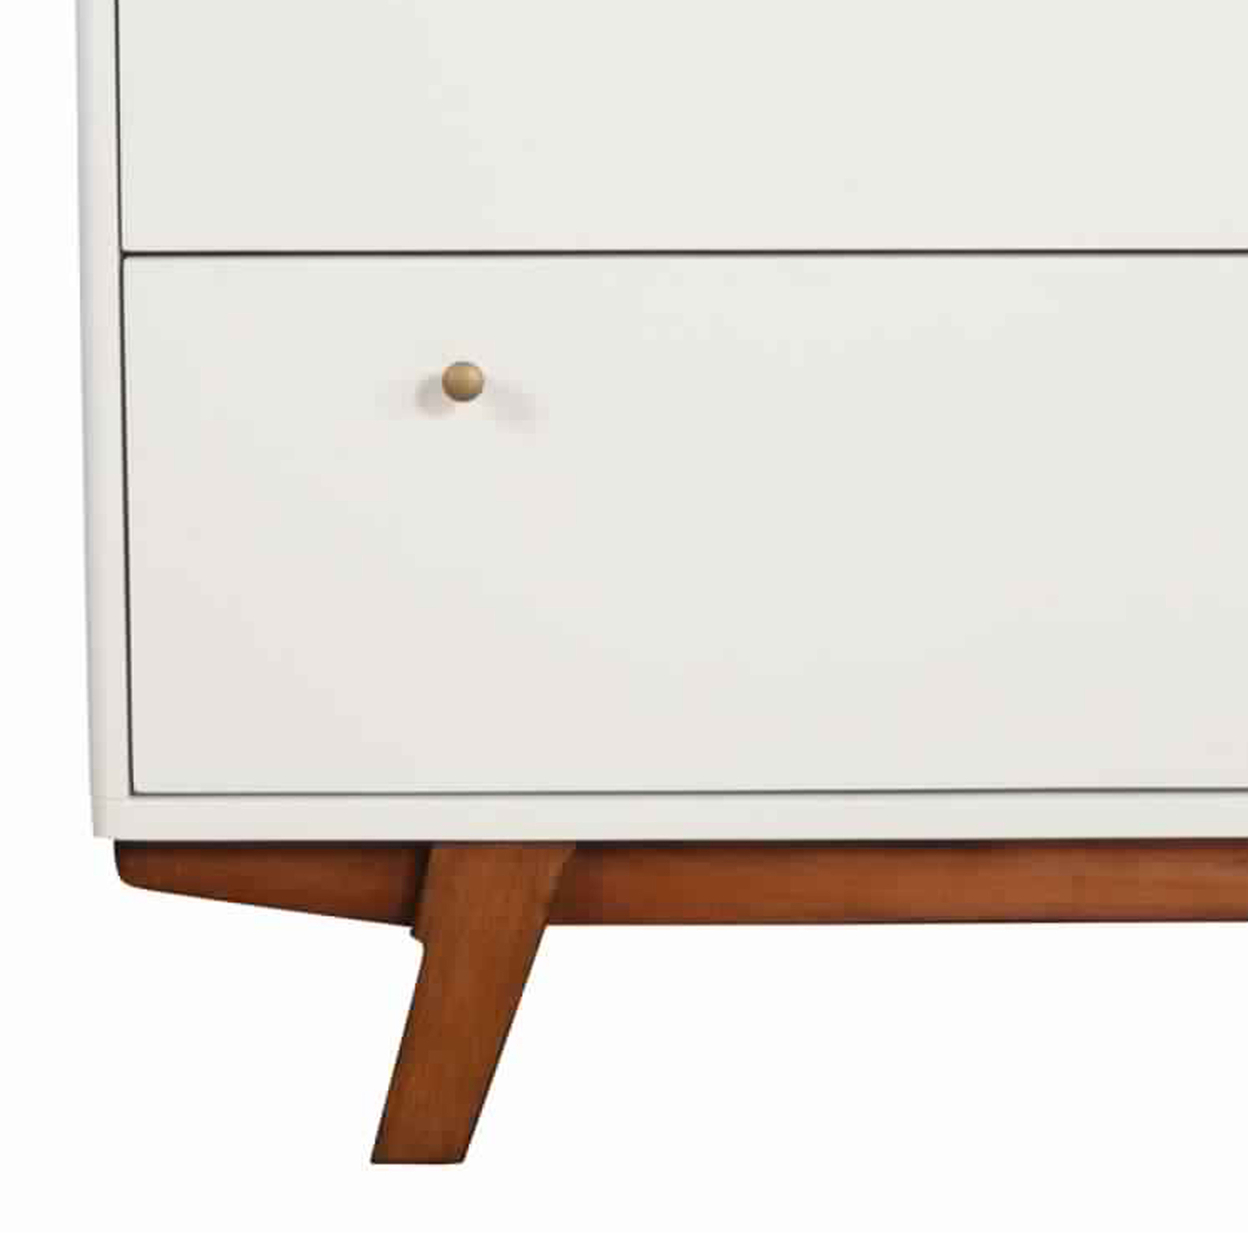 3 Drawer Wood Chest With Round Pulls And Angled Legs, Small,White And Brown- Saltoro Sherpi